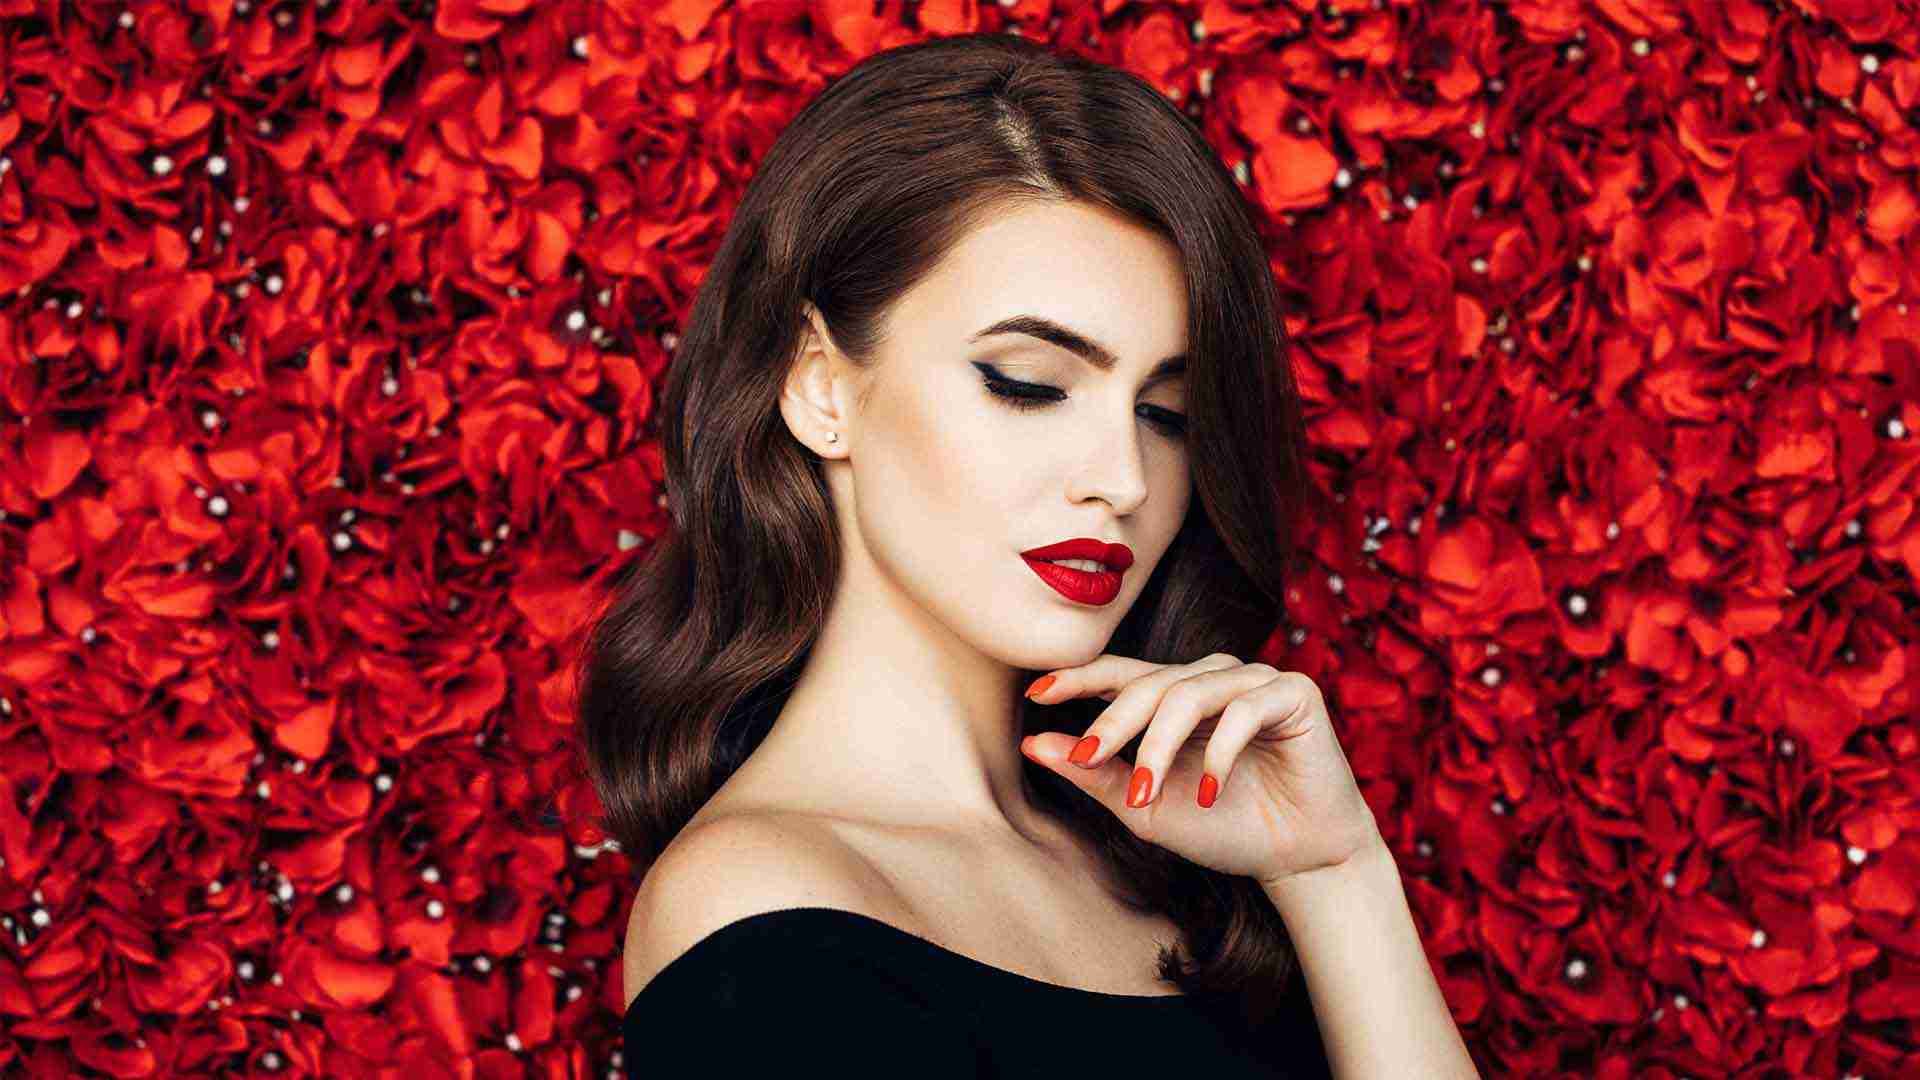 Premium Photo | Fashion beauty portrait of glamorous fashion model wearing  red evening gown. long dark shiny hair with hollywood wave hairstyle, makeup  and rose flower